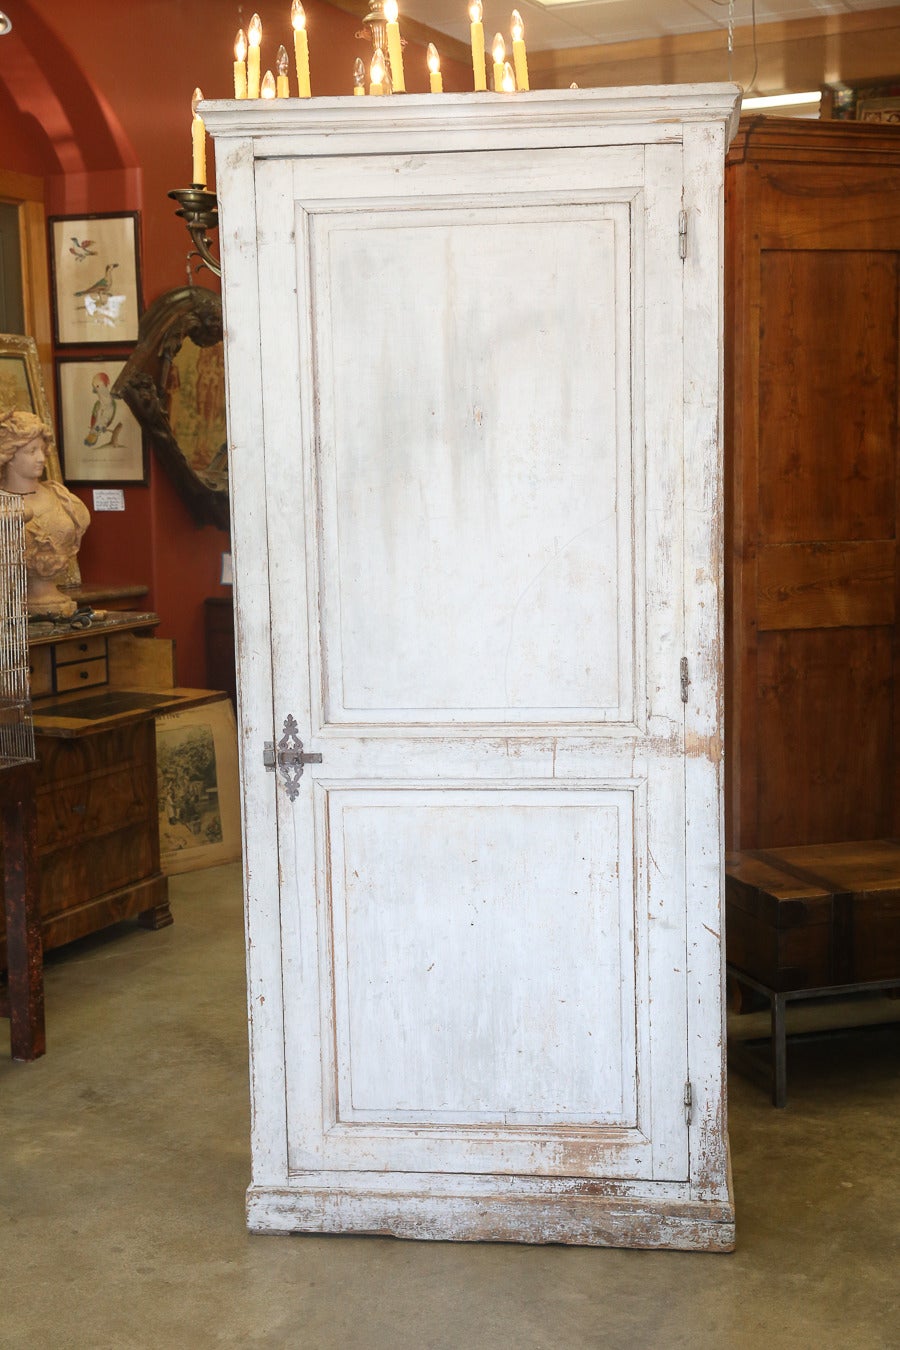 Bonnetiere (1 door armoire) from convent in the Loire Valley outside Tours. Painted